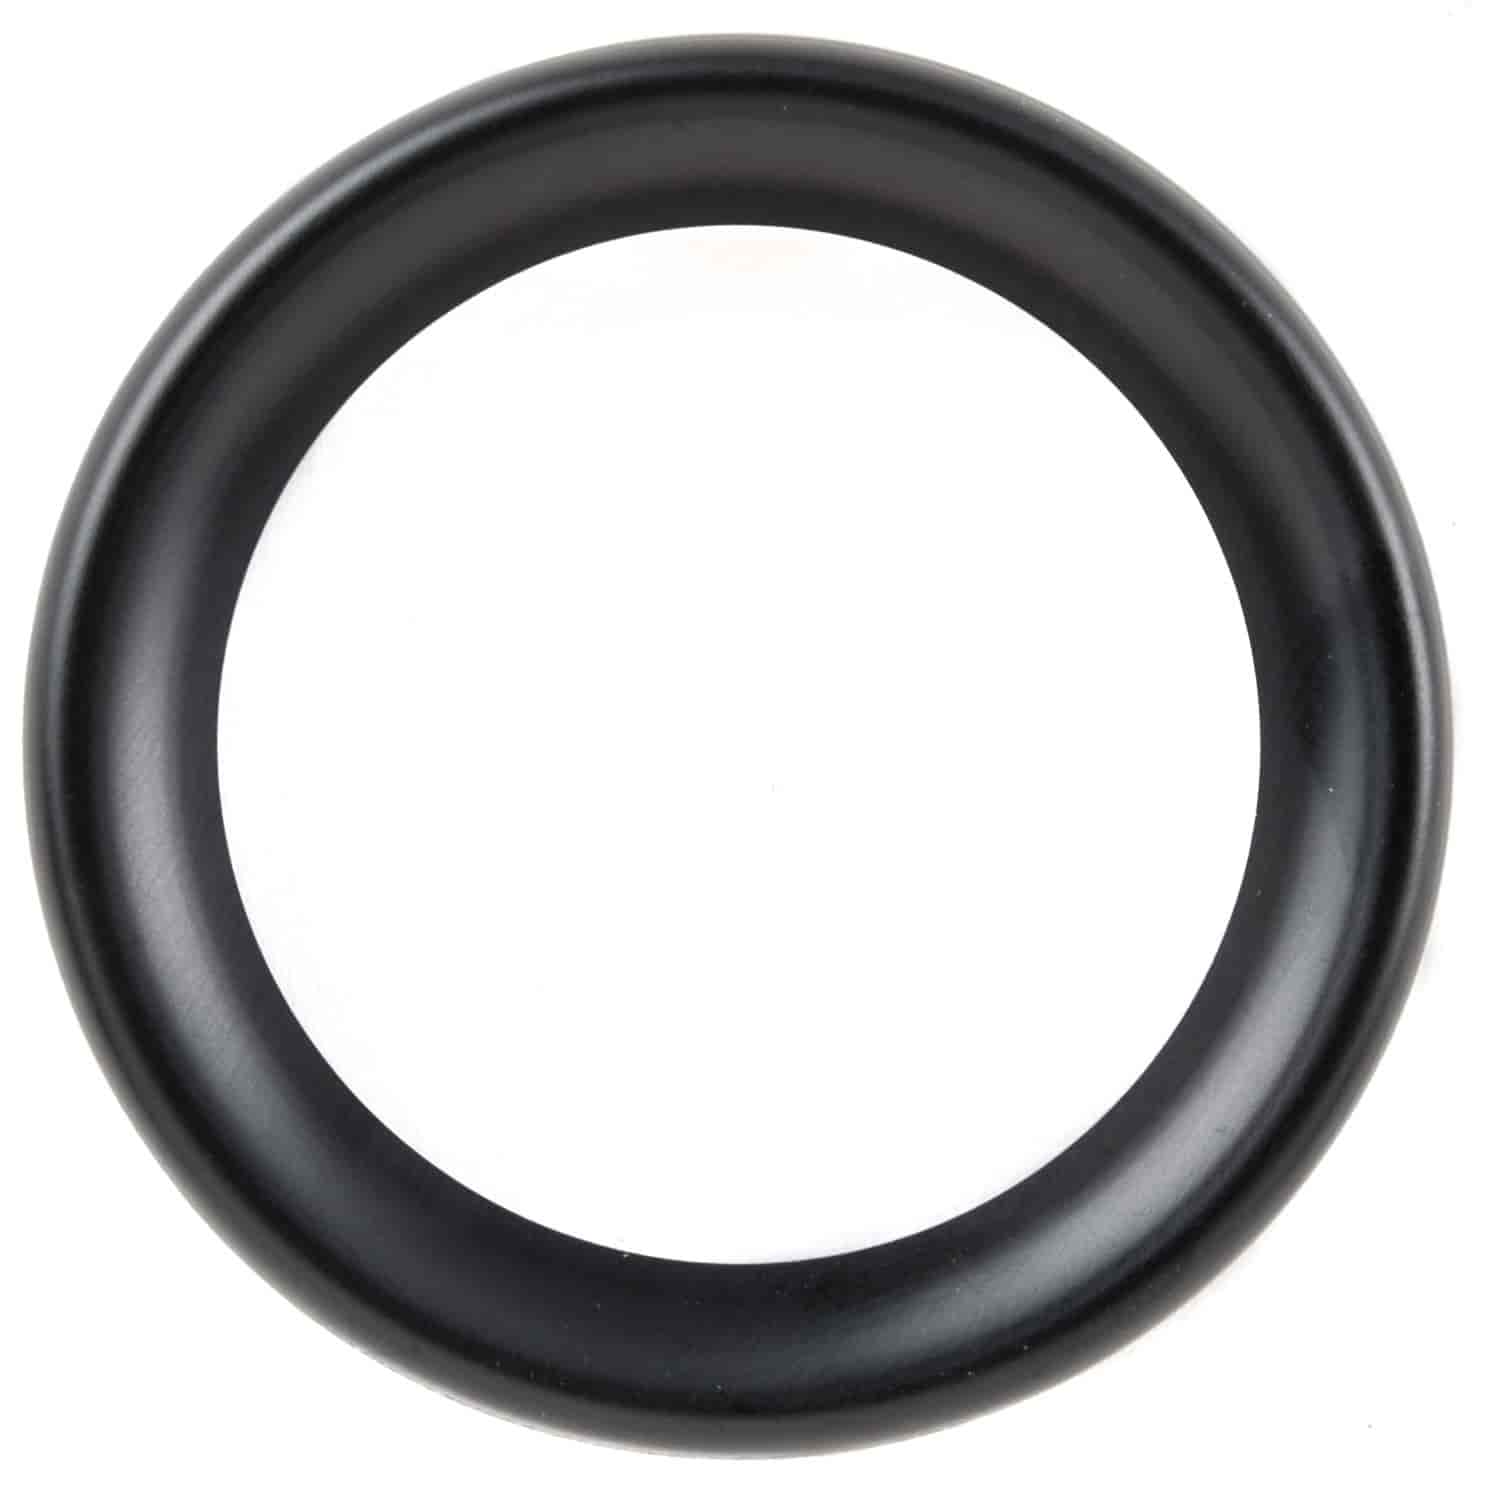 Black Replacement Bezel [Fits JEGS 2-1/16 in. Gauges]